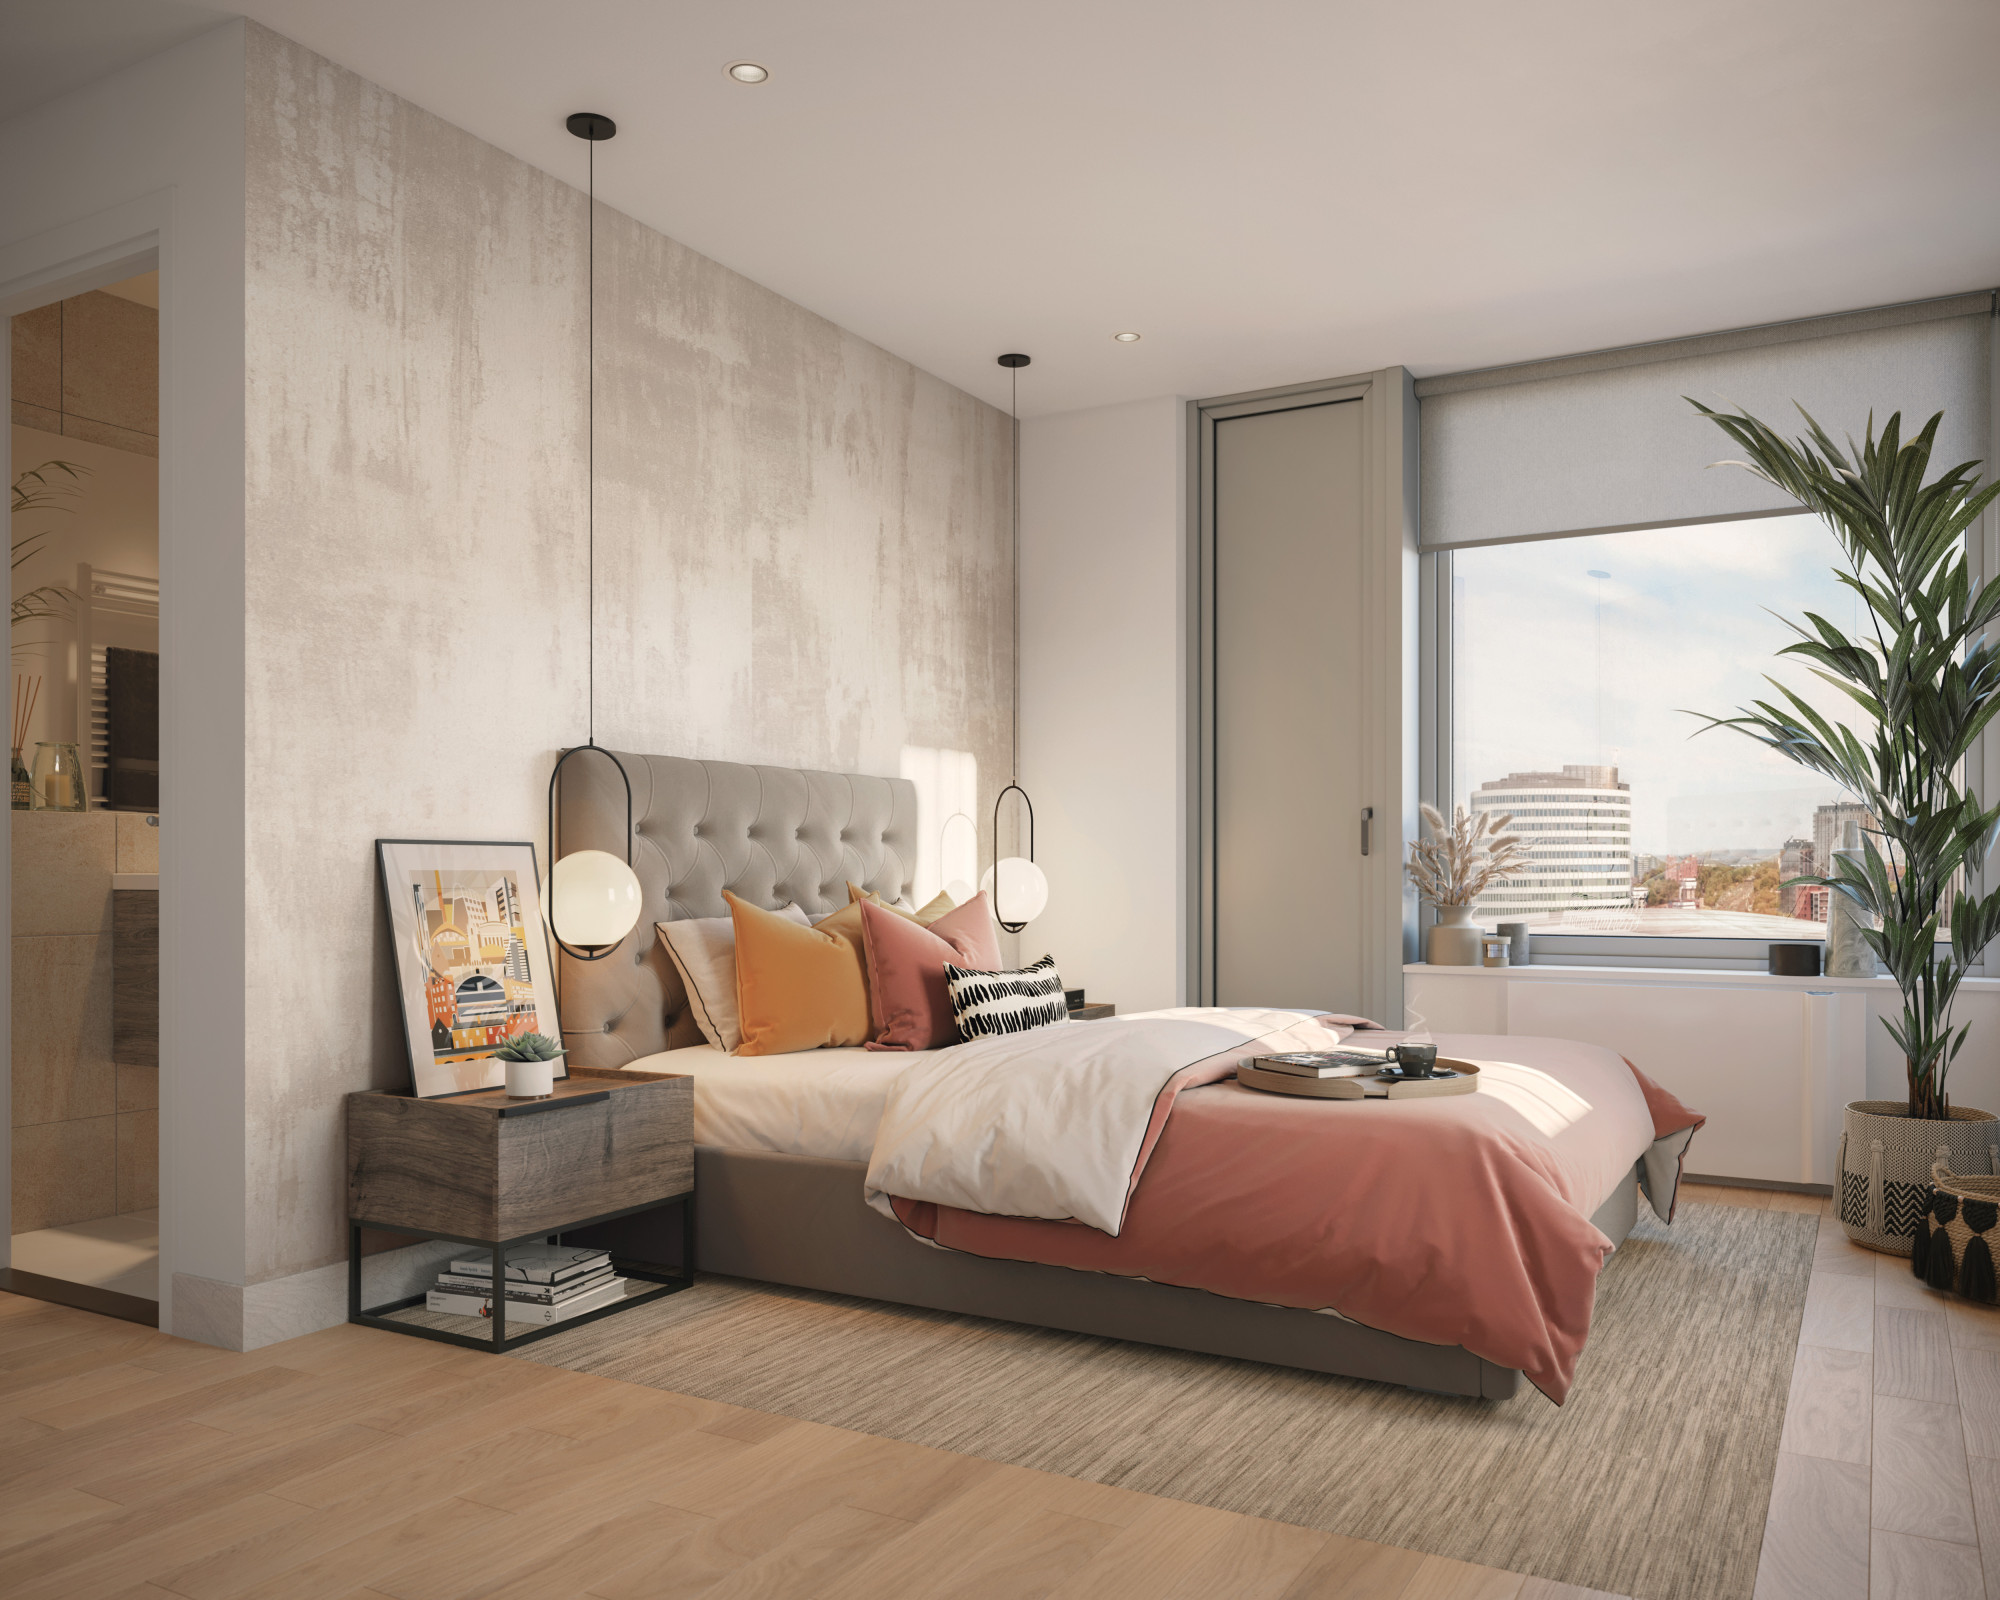 1 bed Residential Apartments Building For Sale in Manchester, Manchester - thumb 3